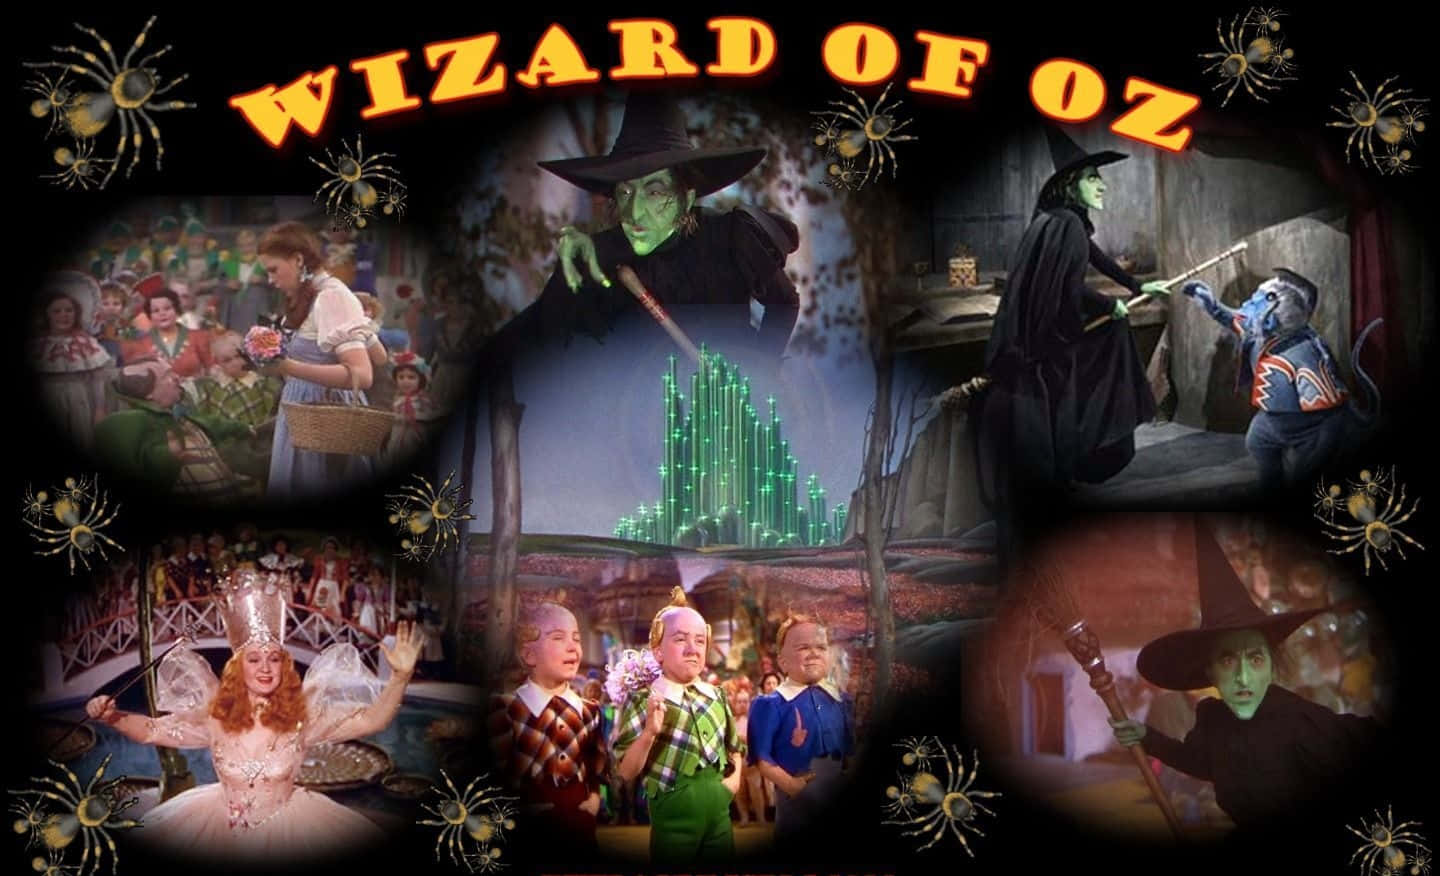 Dorothy and the Scarecrow share a laugh in the Emerald City Wallpaper